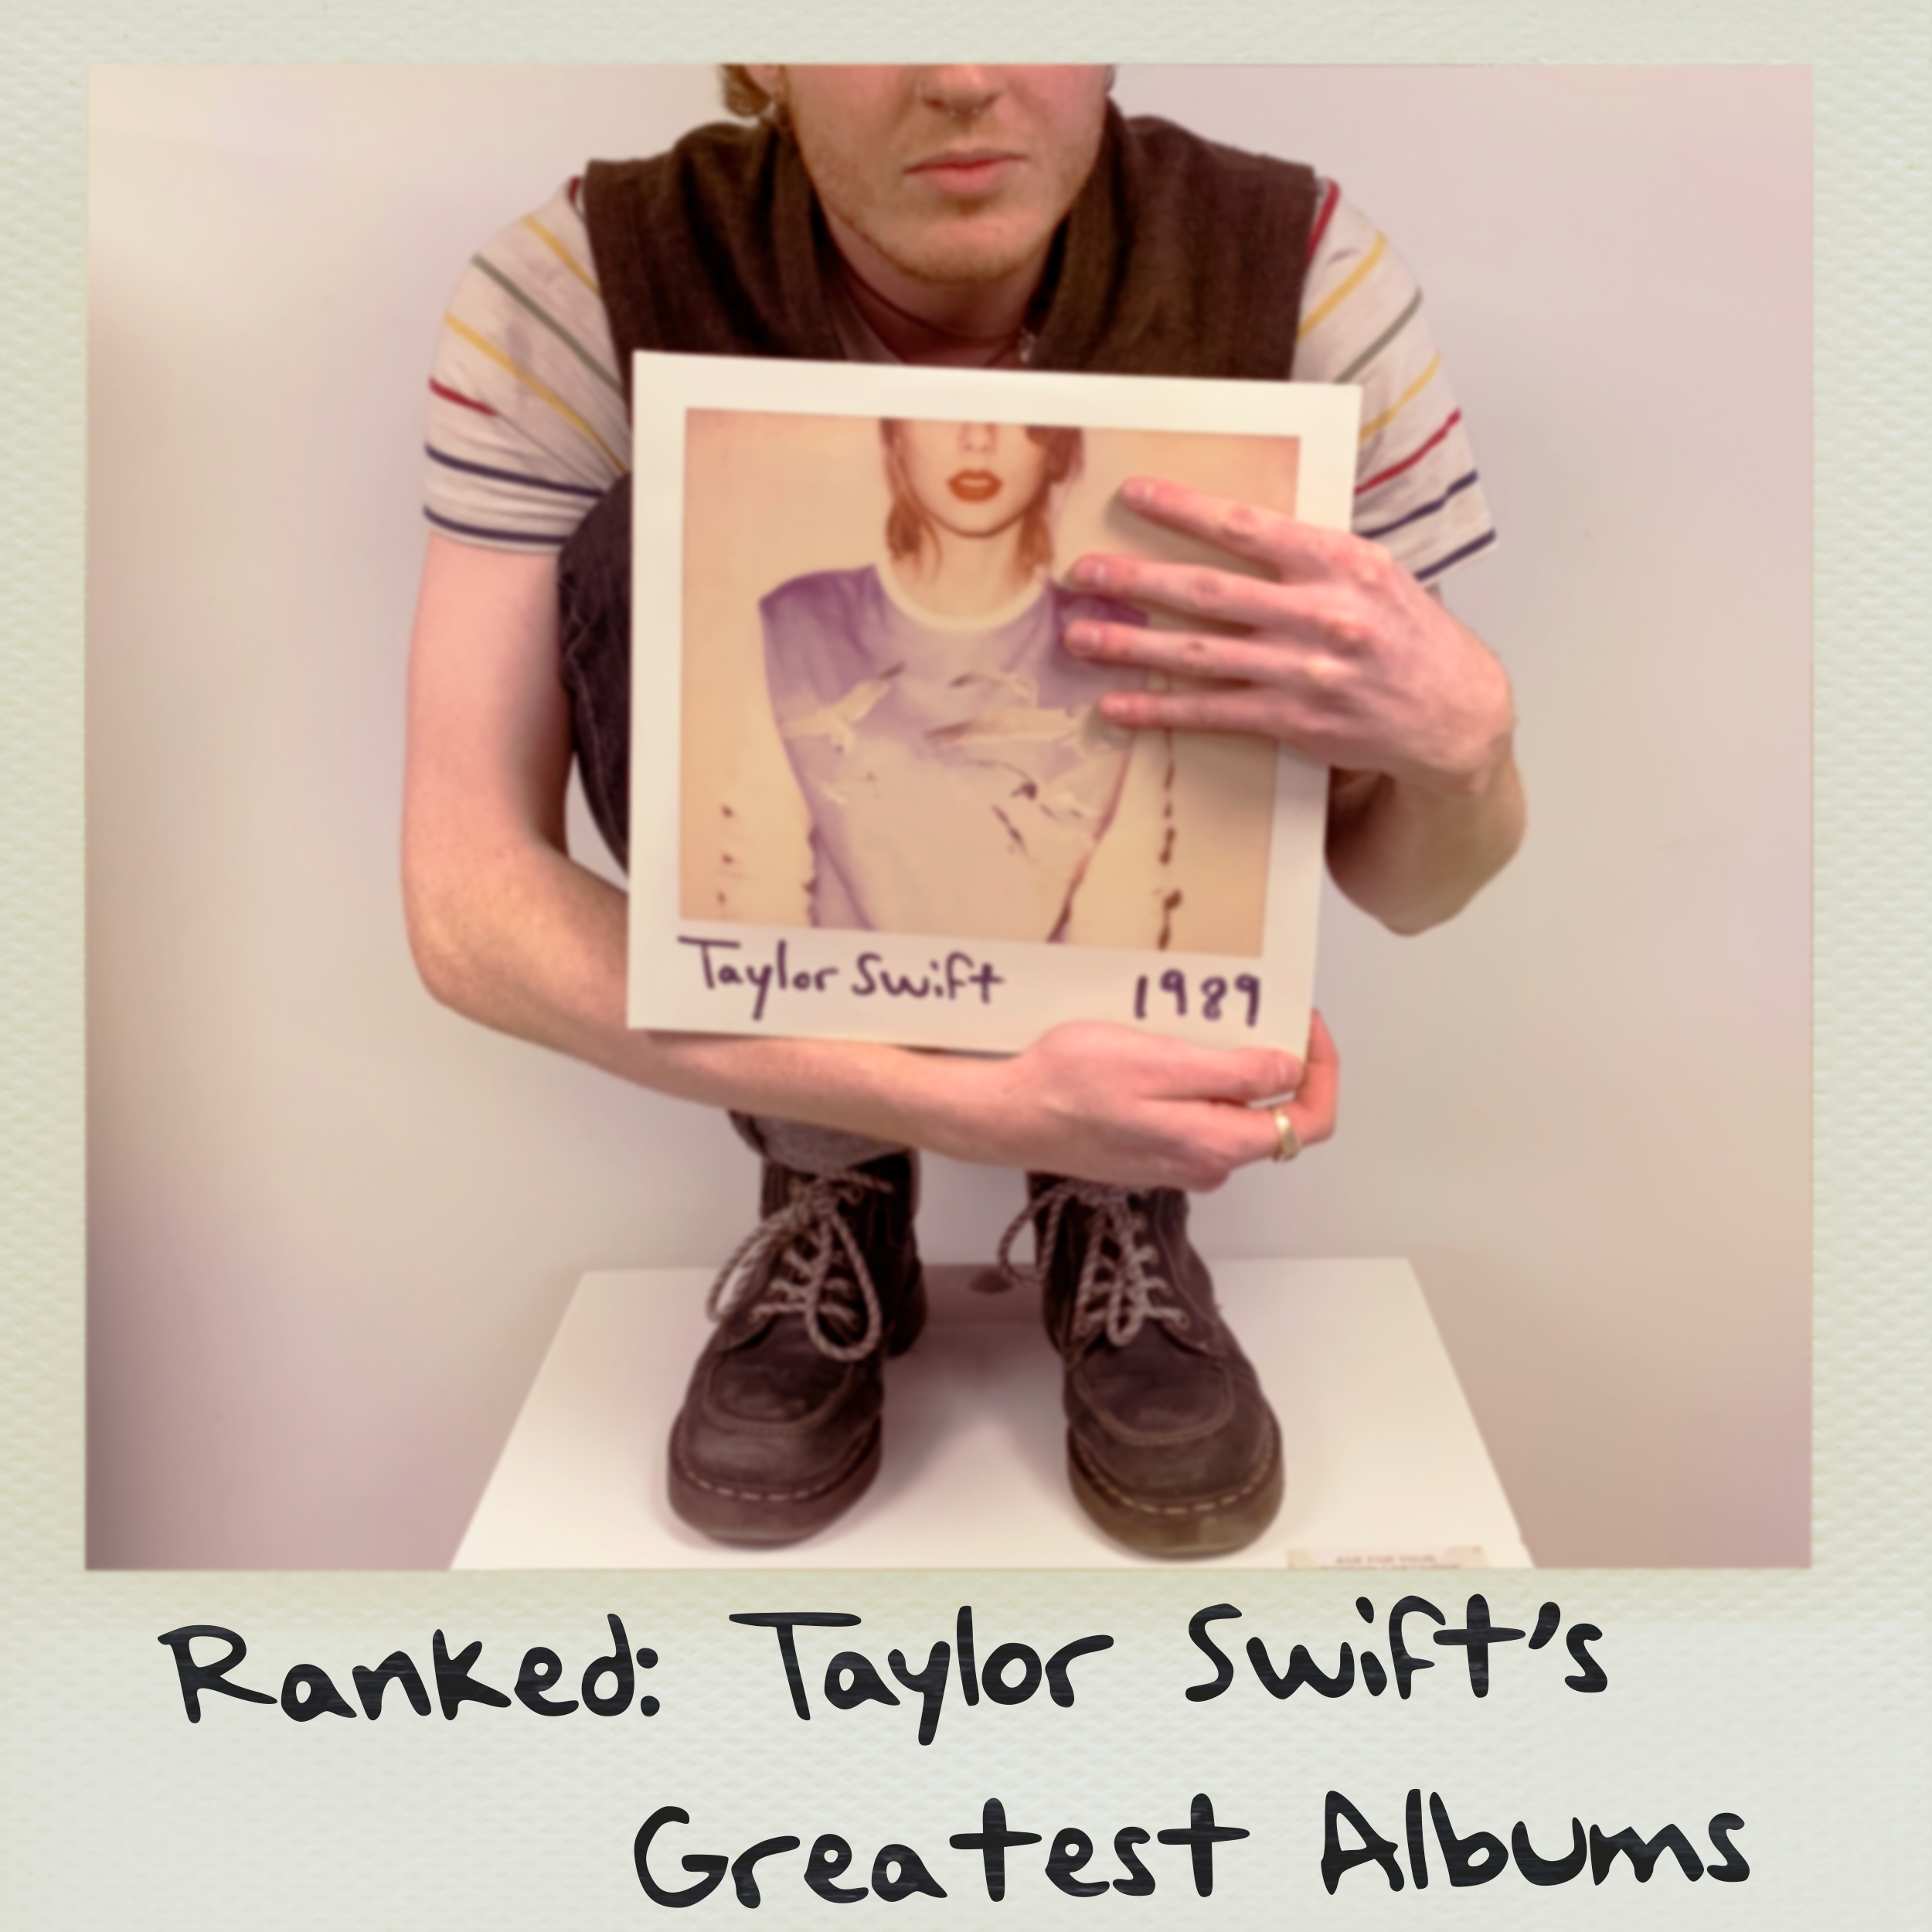 Ranked: Taylor Swift's Greatest Albums